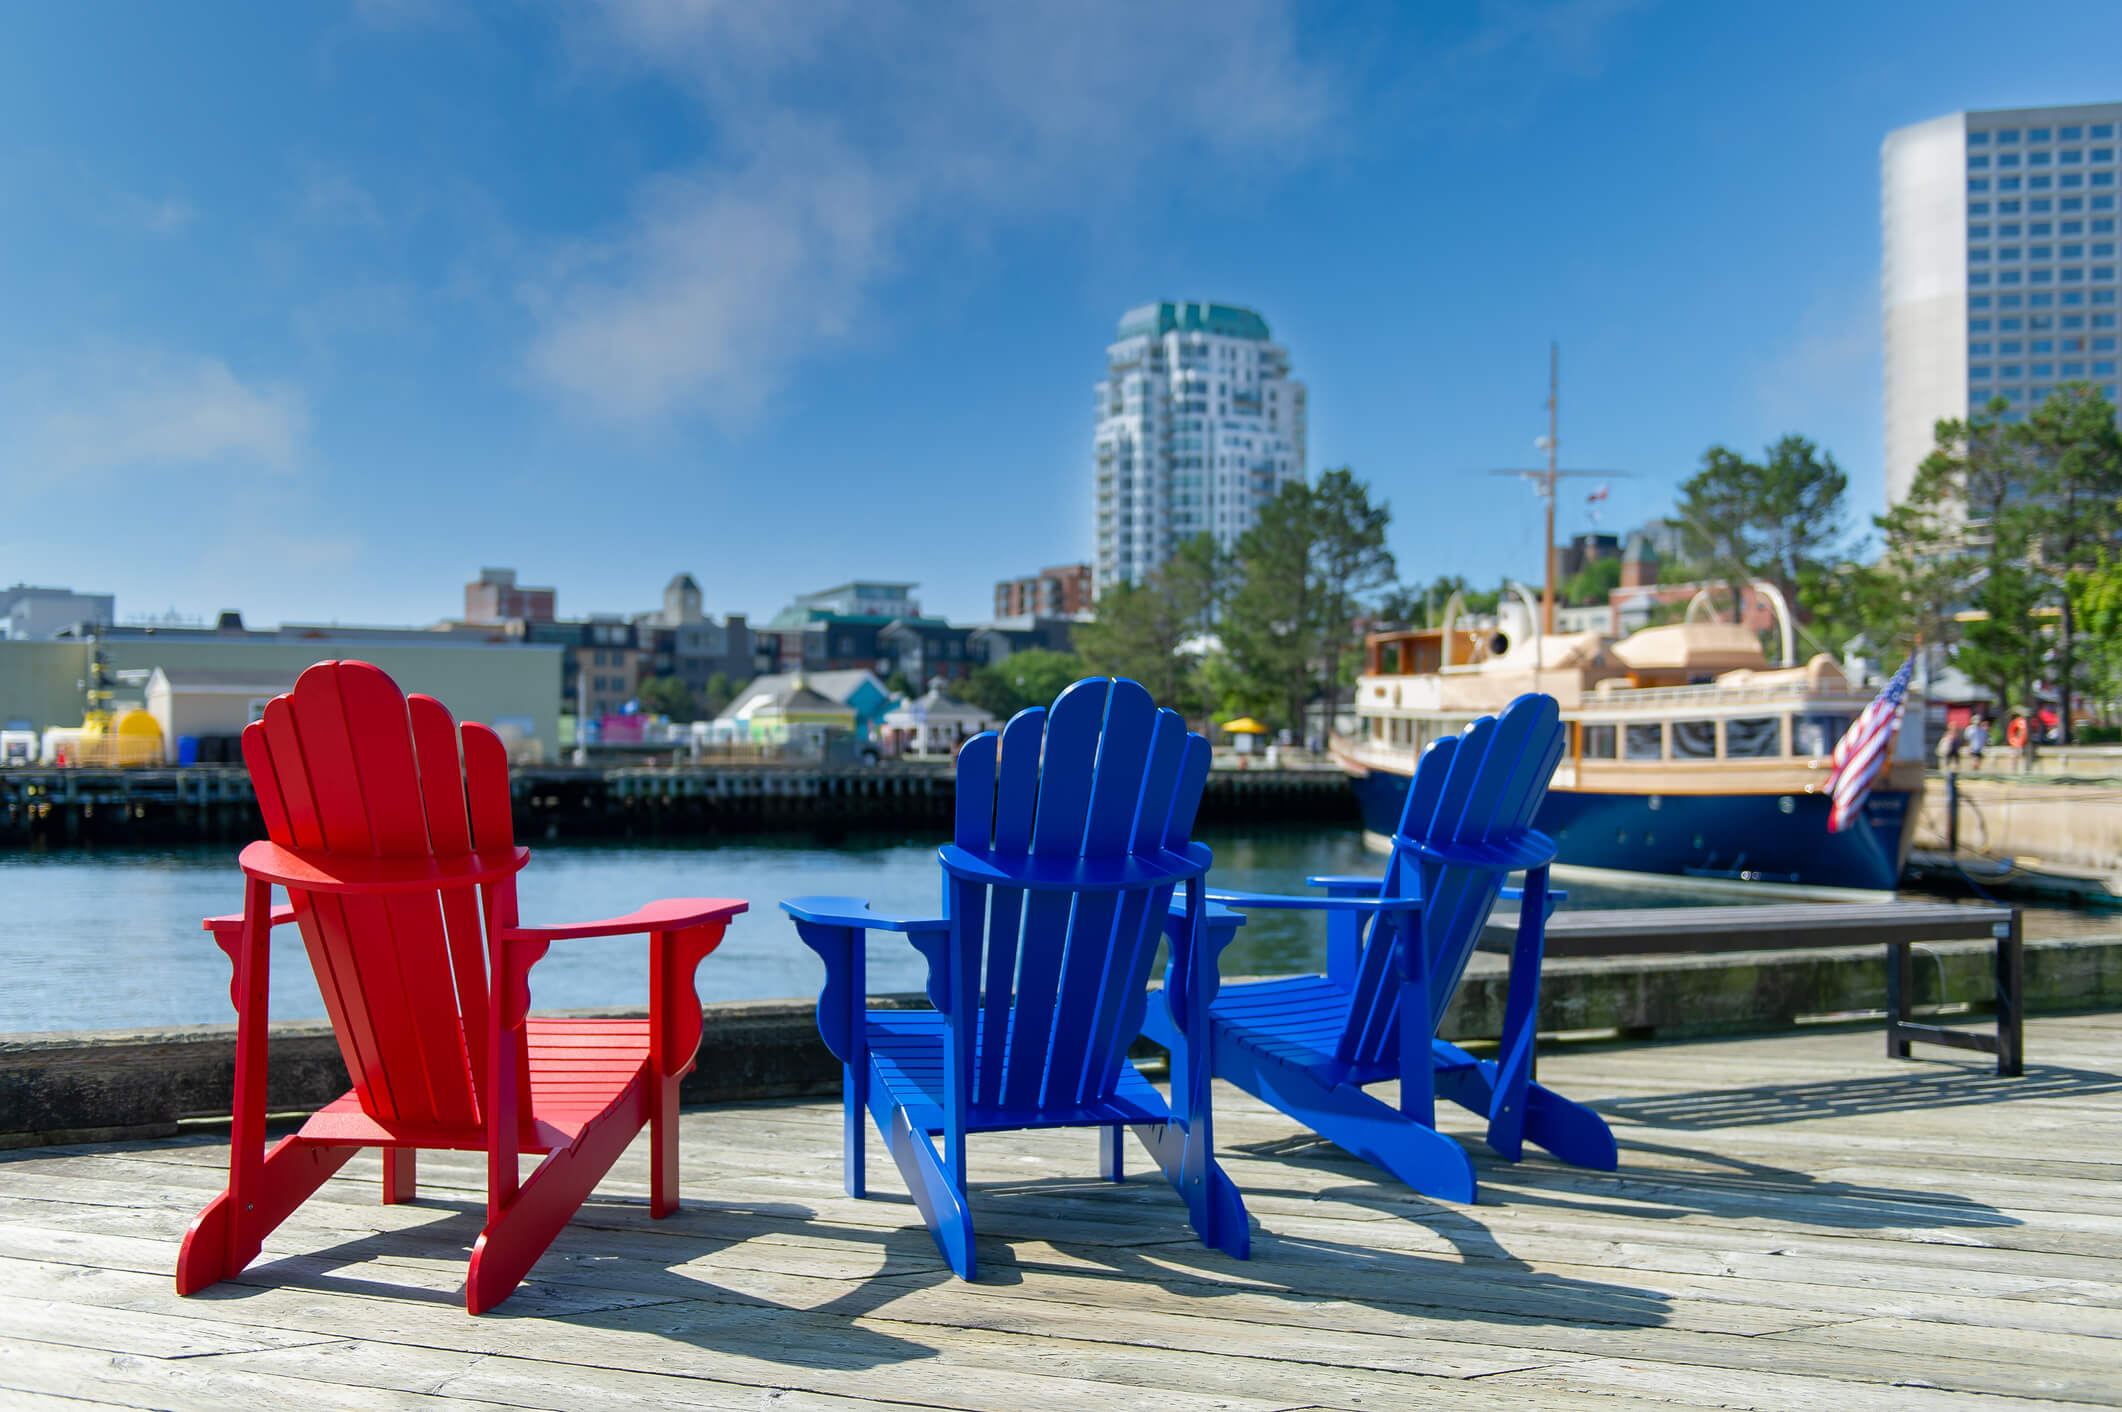 Chairs on waterfront with city in the background